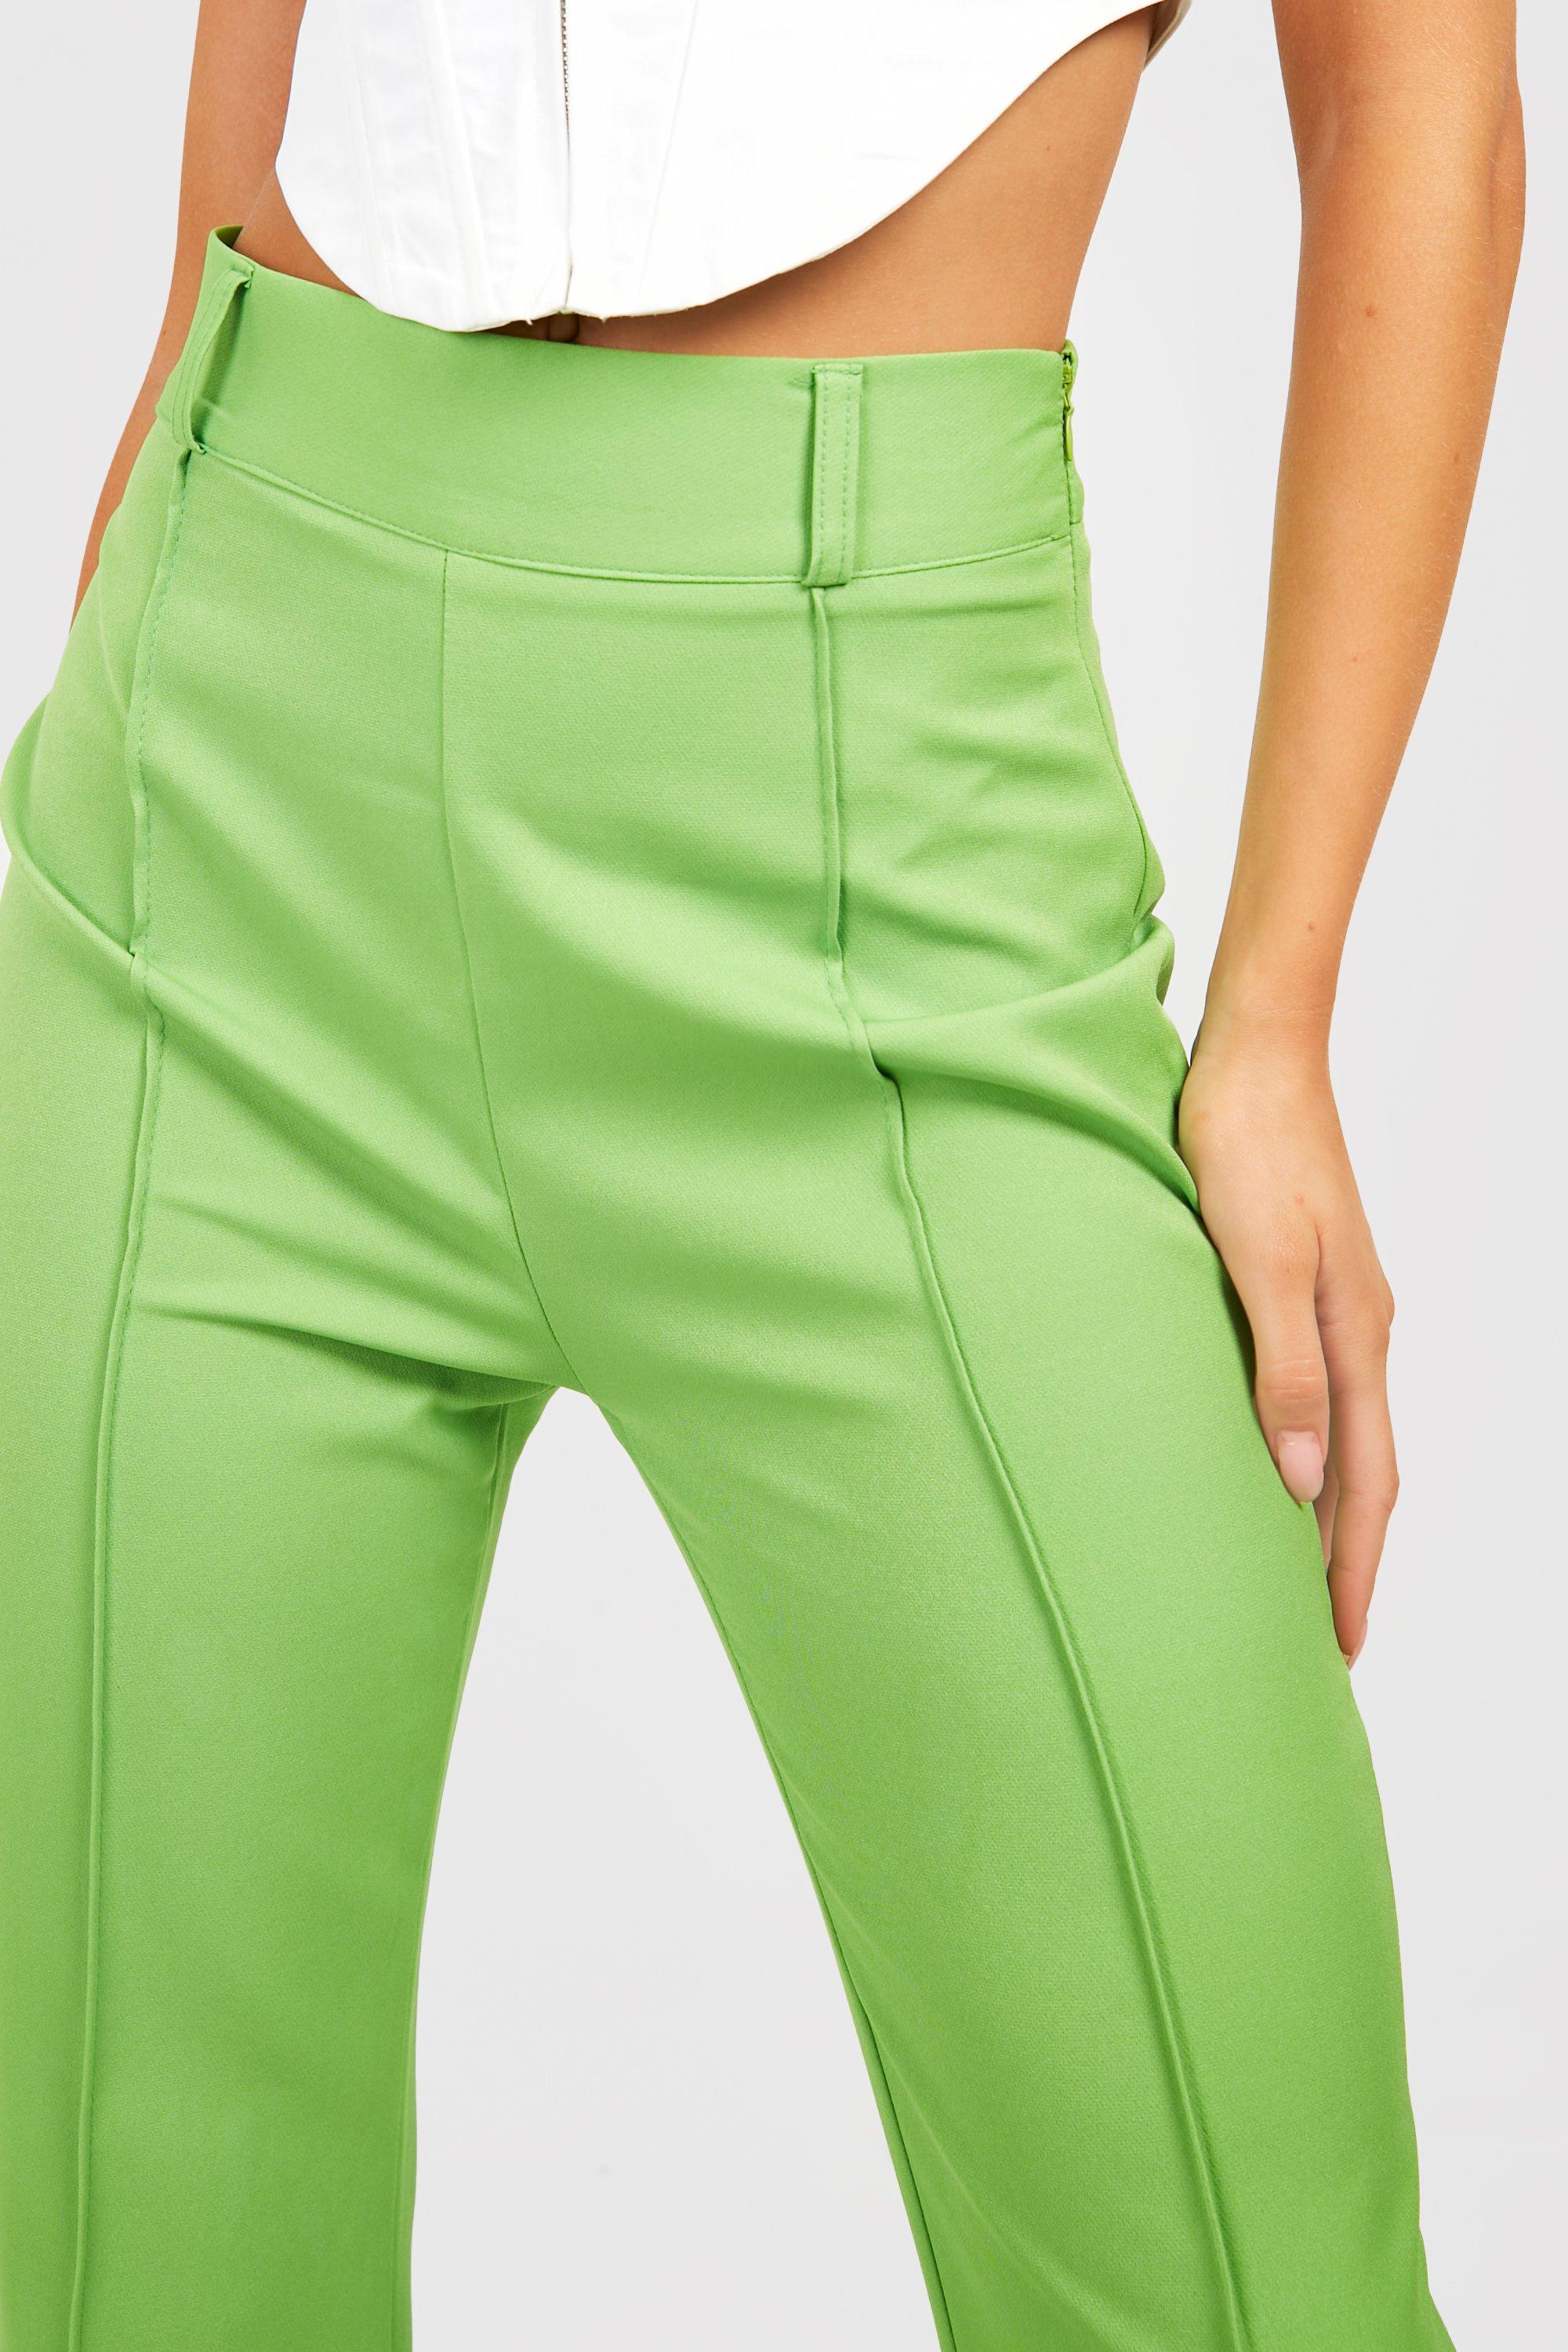 Women's High Waisted Flared Work Trousers